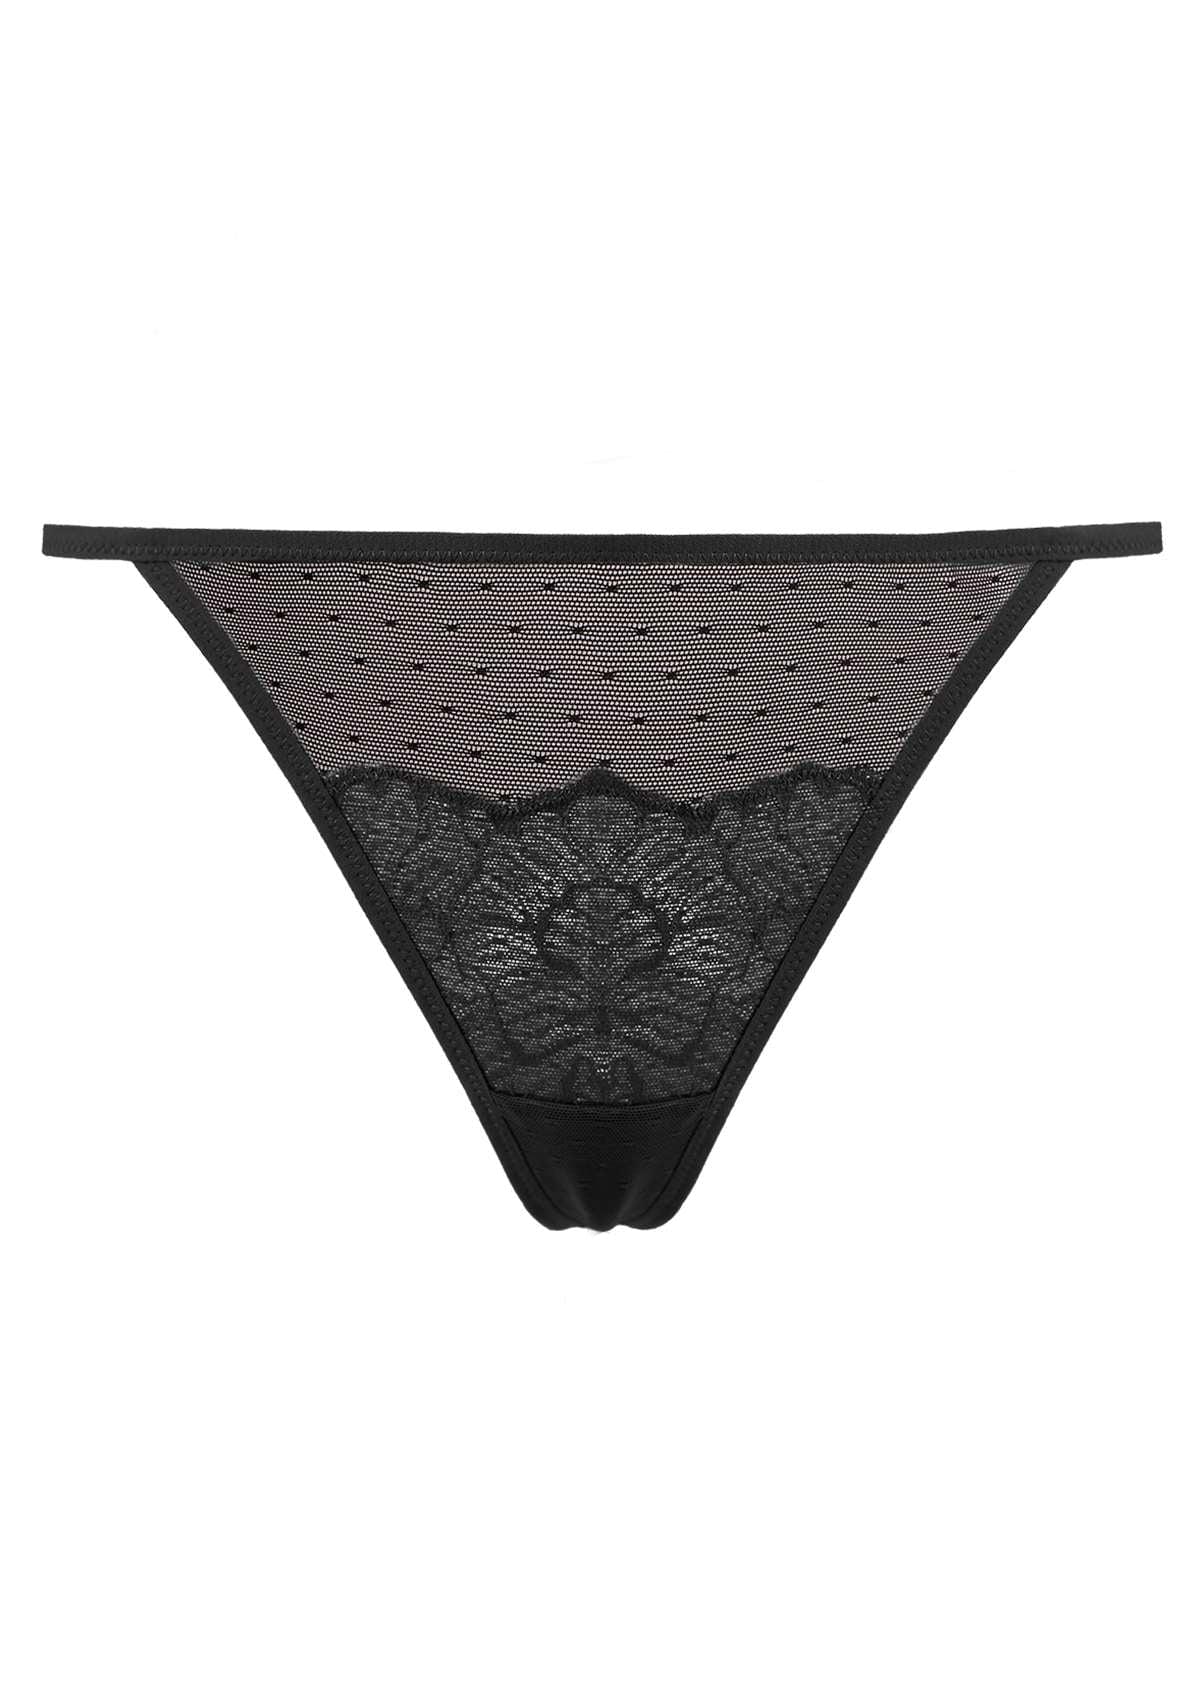 HSIA Blossom Floral Lace Mesh Cheeky Sexy String Thongs - 3 Pack - M / Storm Blue+Dark Pink+Black